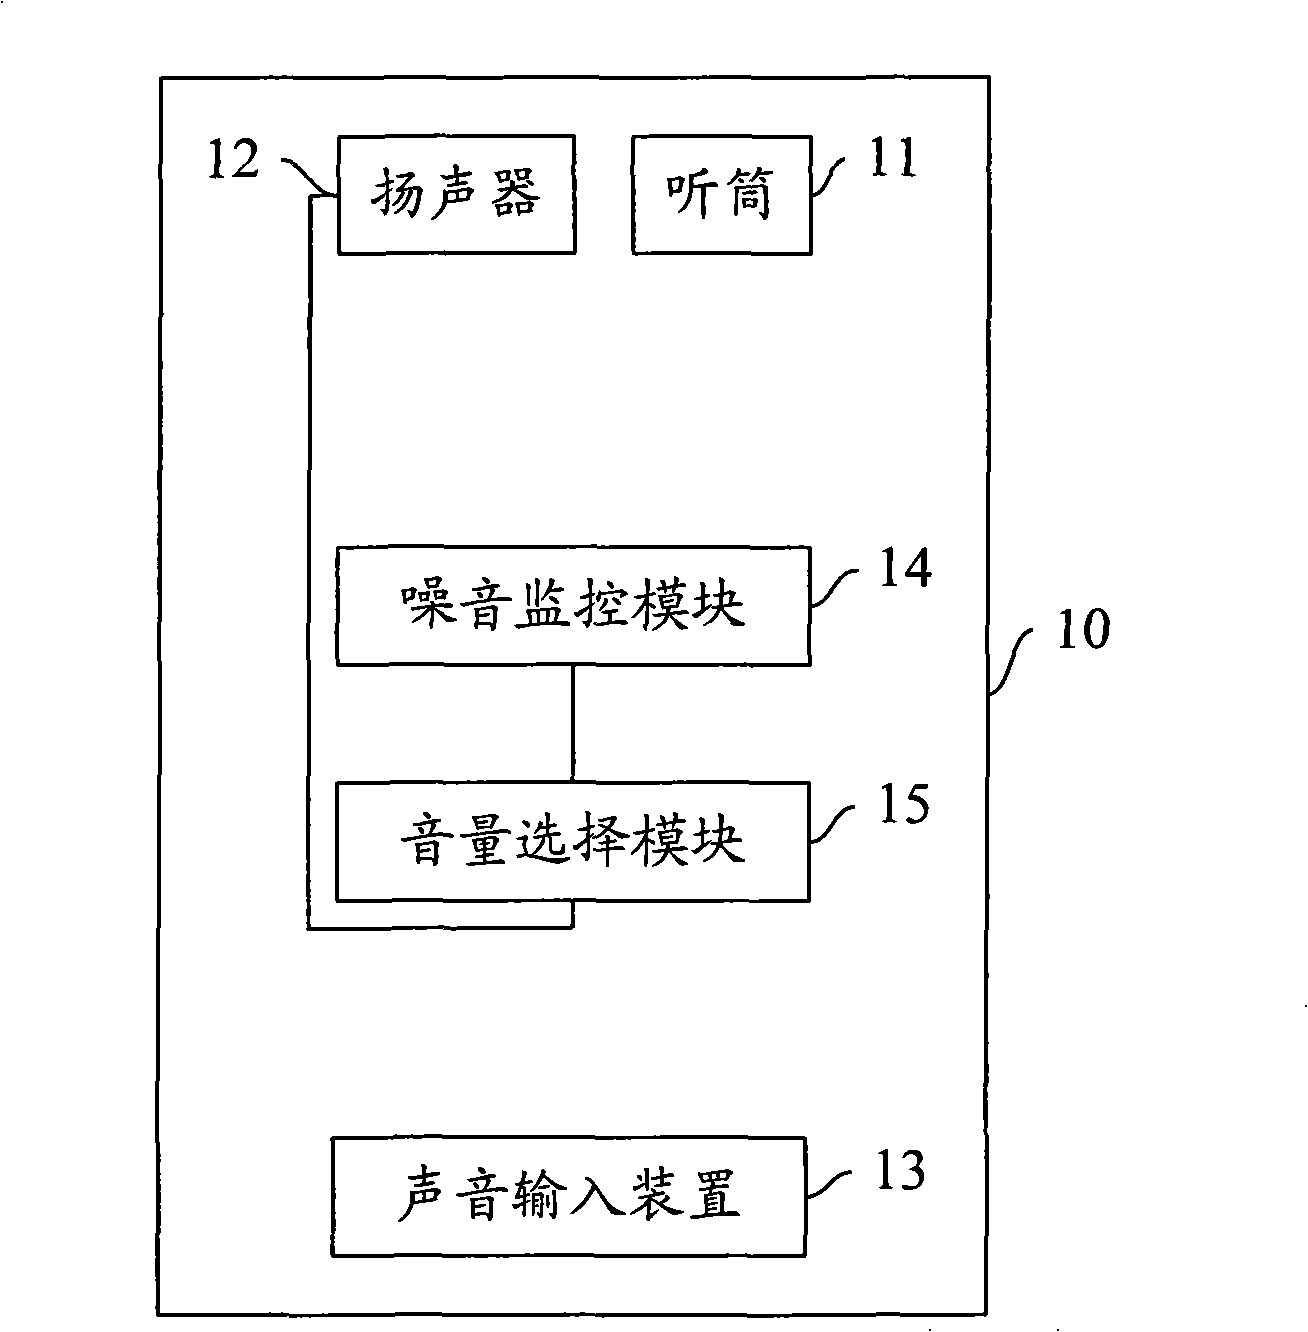 Mobile terminal and method for improving speech quality